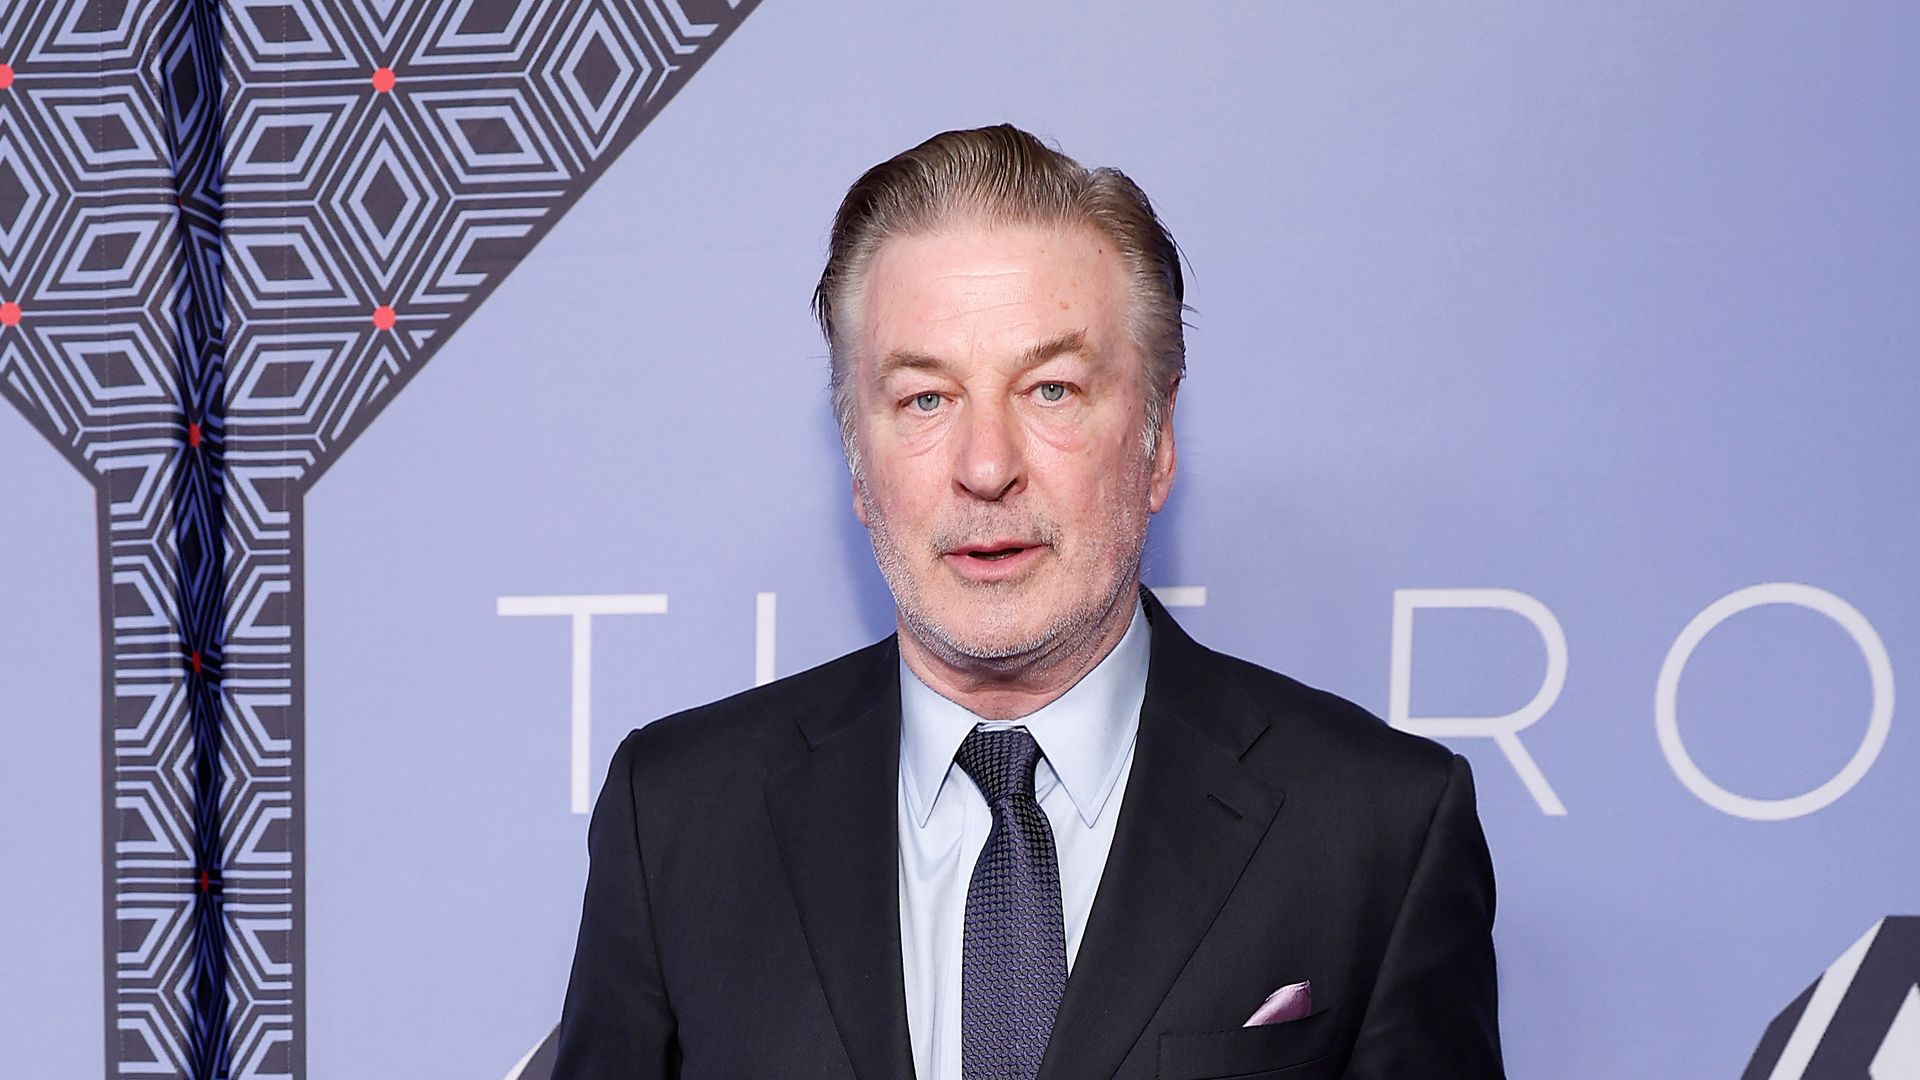 Alec Baldwin attends The Roundabout Gala 2023 at The Ziegfeld Ballroom on March 06, 2023 in New York City